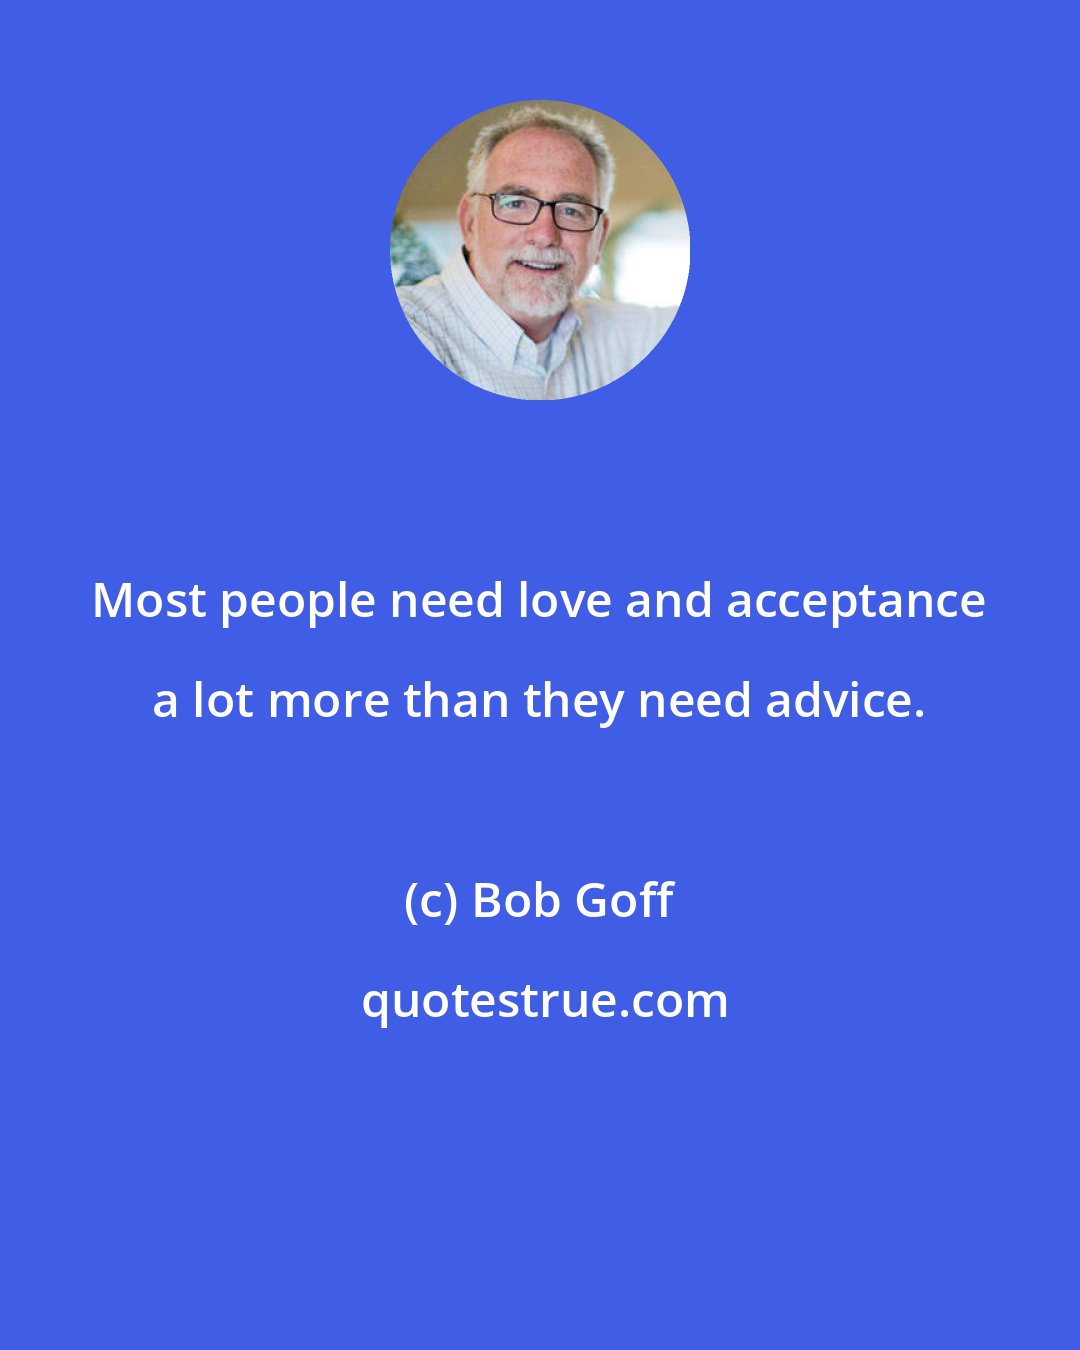 Bob Goff: Most people need love and acceptance a lot more than they need advice.